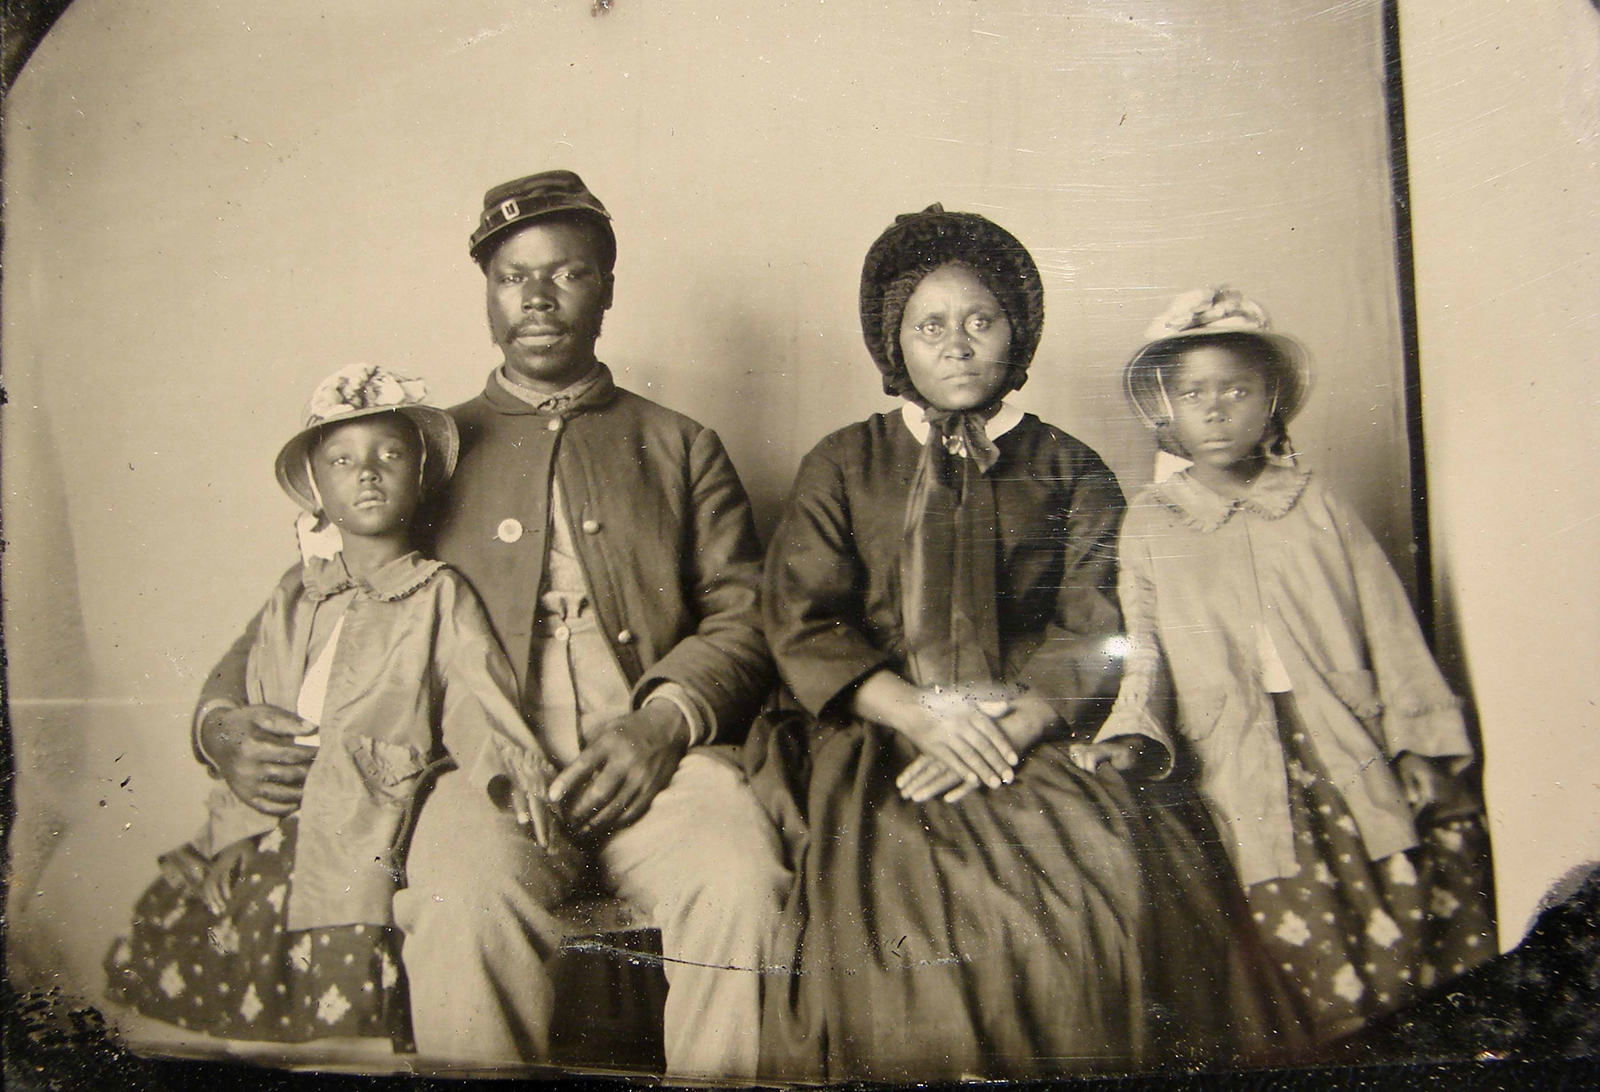 Unidentified African American soldier in Union uniform with wife and two daughters, between 1863-1865